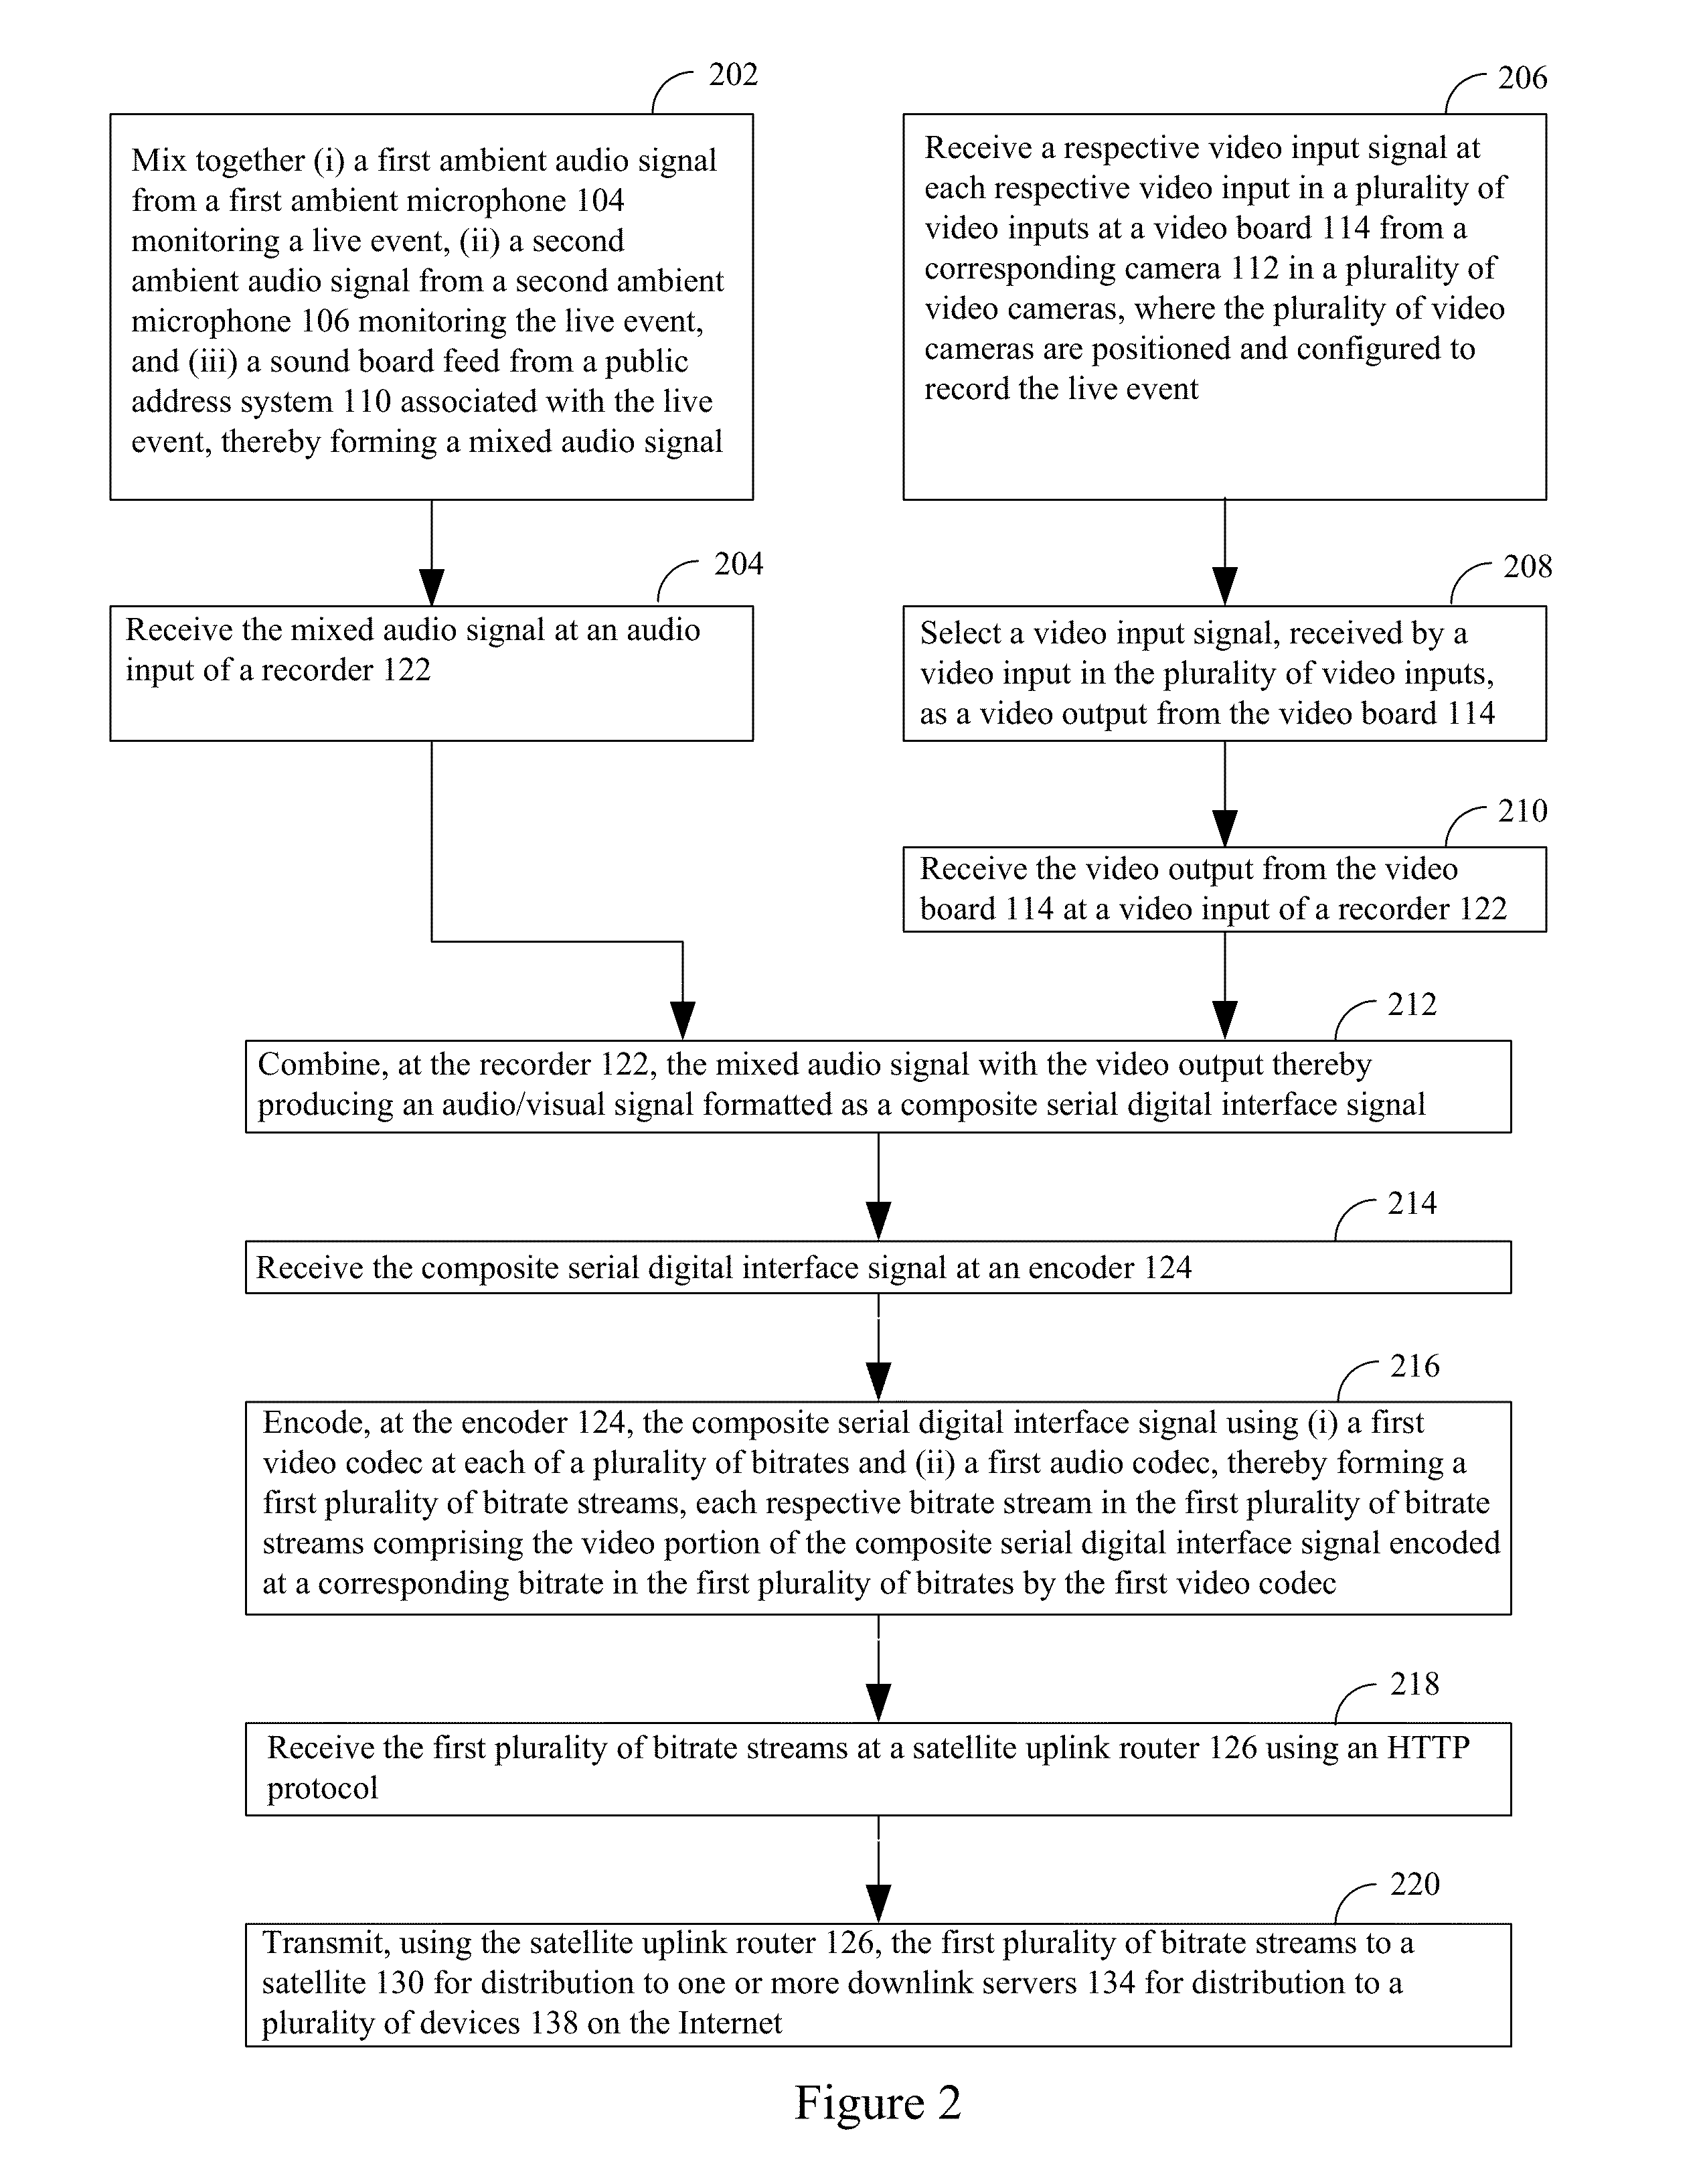 Systems and methods for communicating a live event to users using the internet